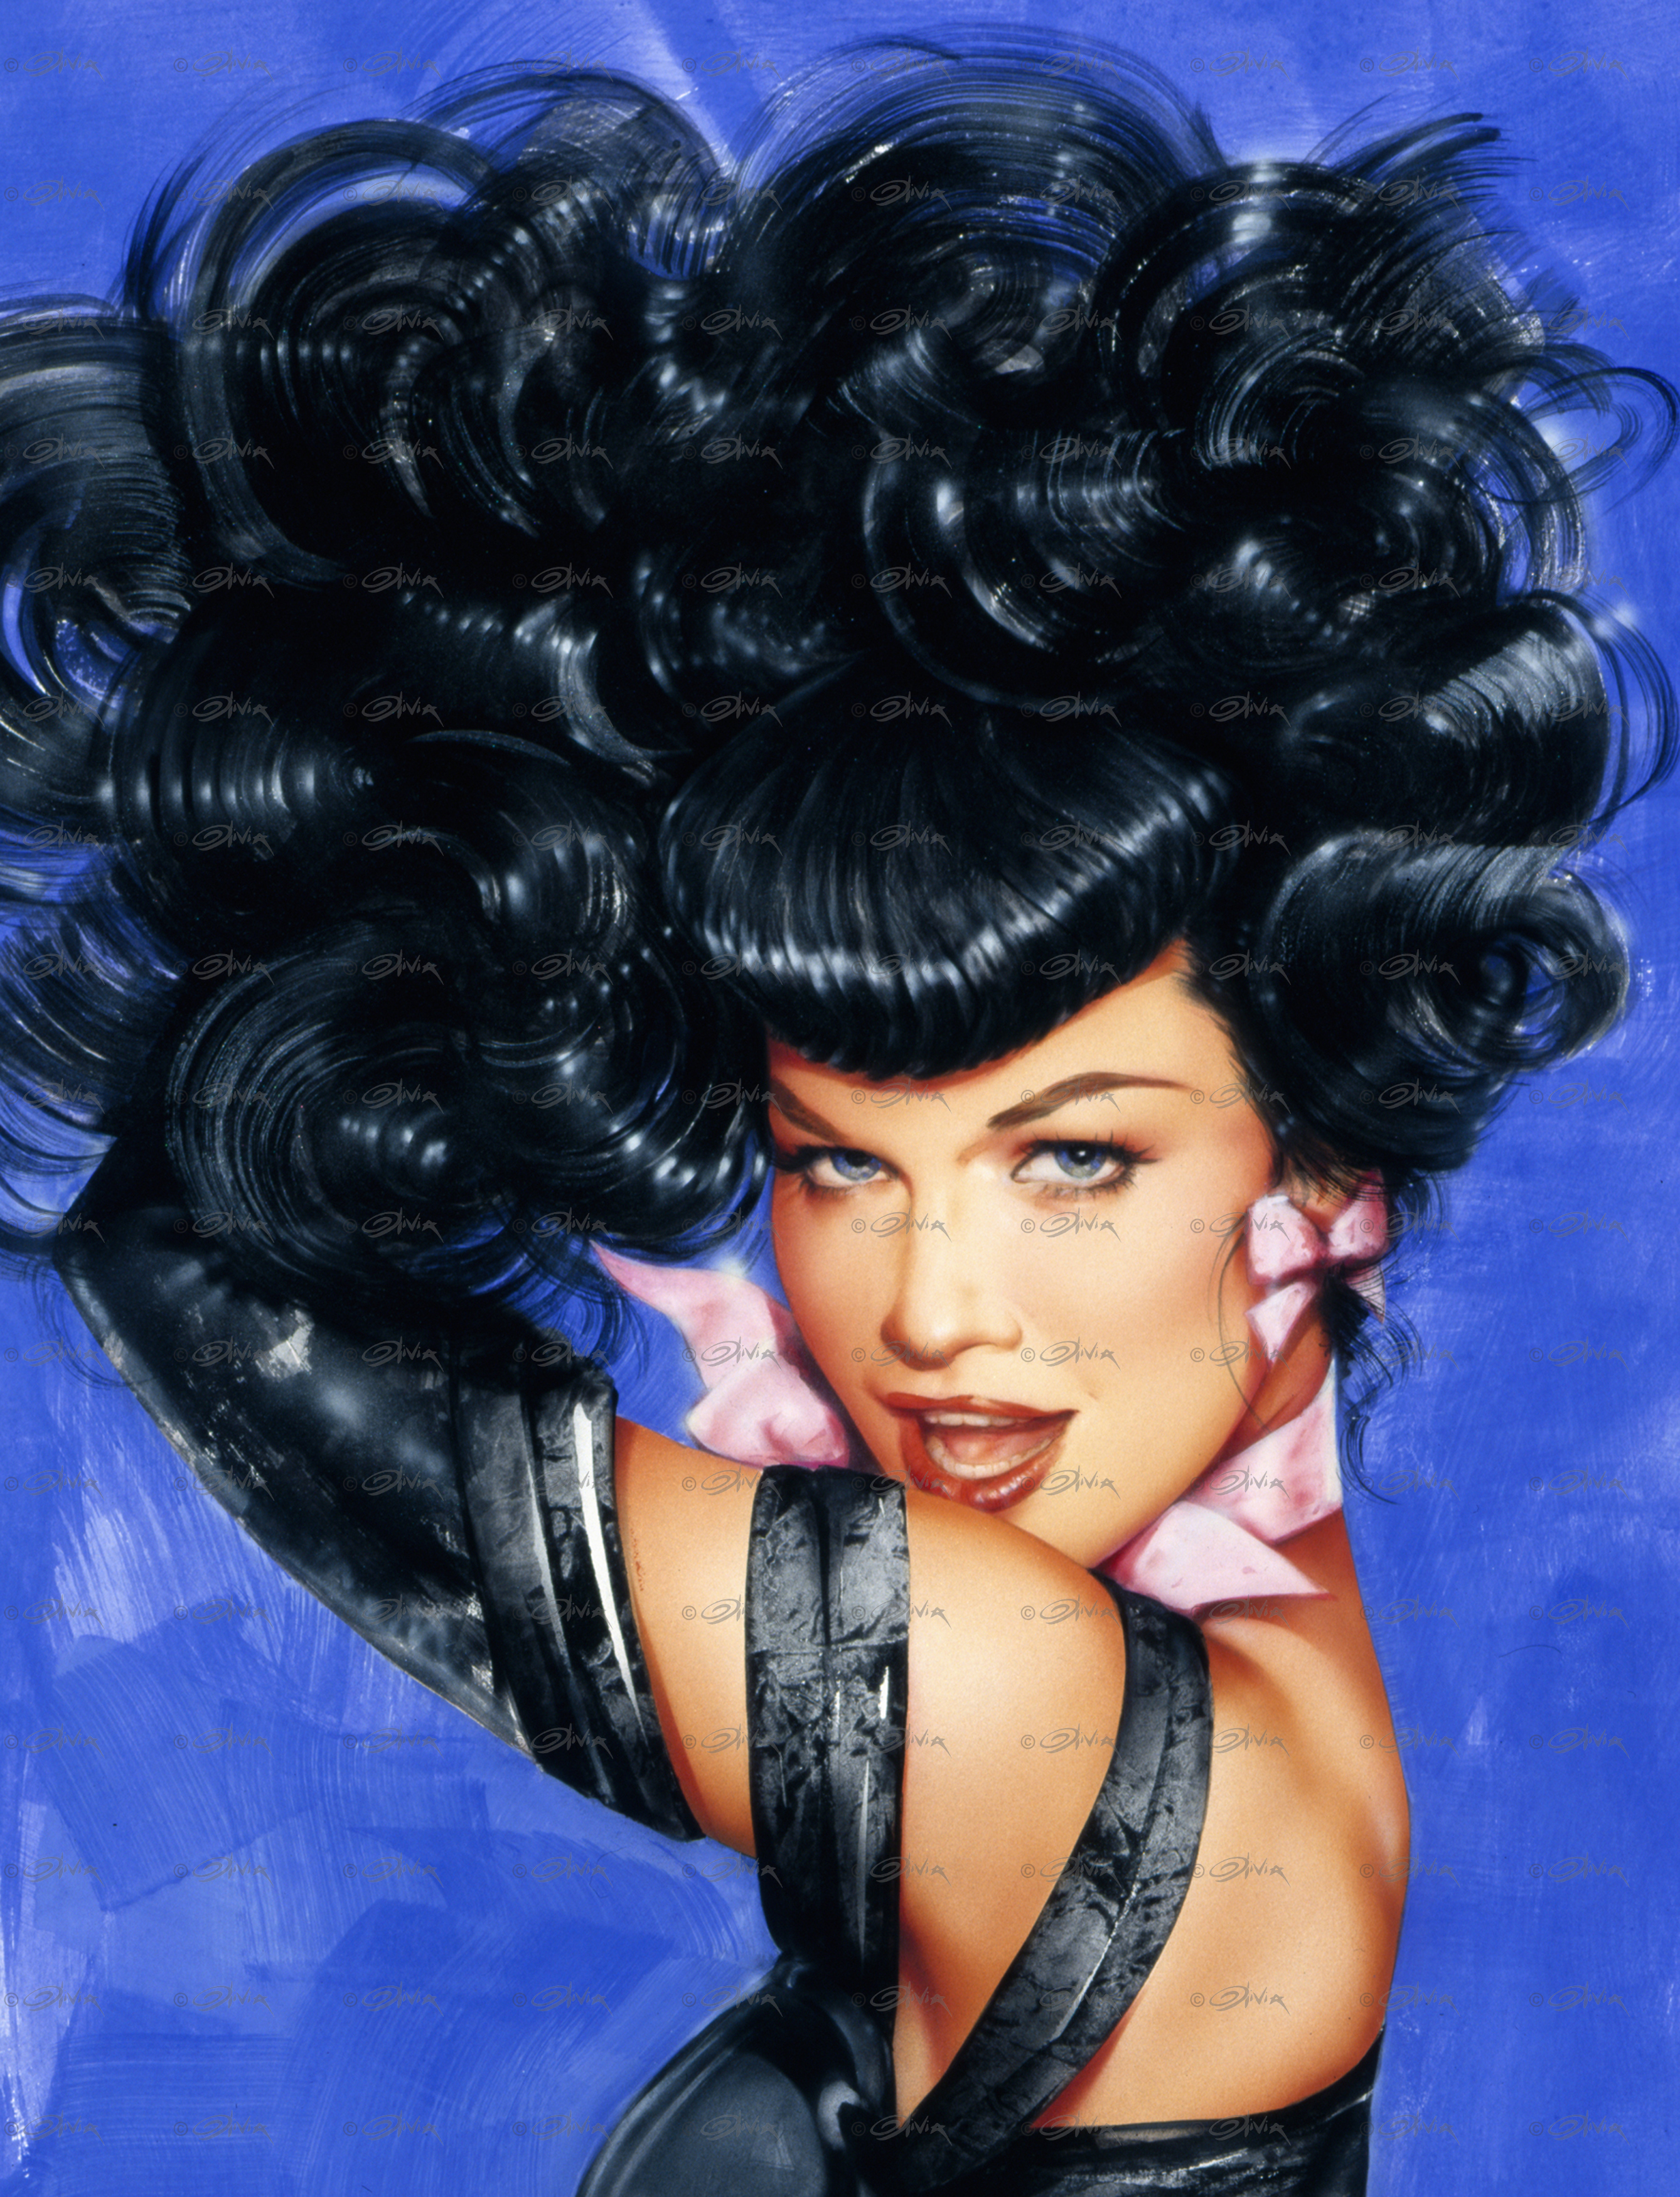 BETTIE PAGE'S EYES Limited Edition on Paper | eOlivia.com